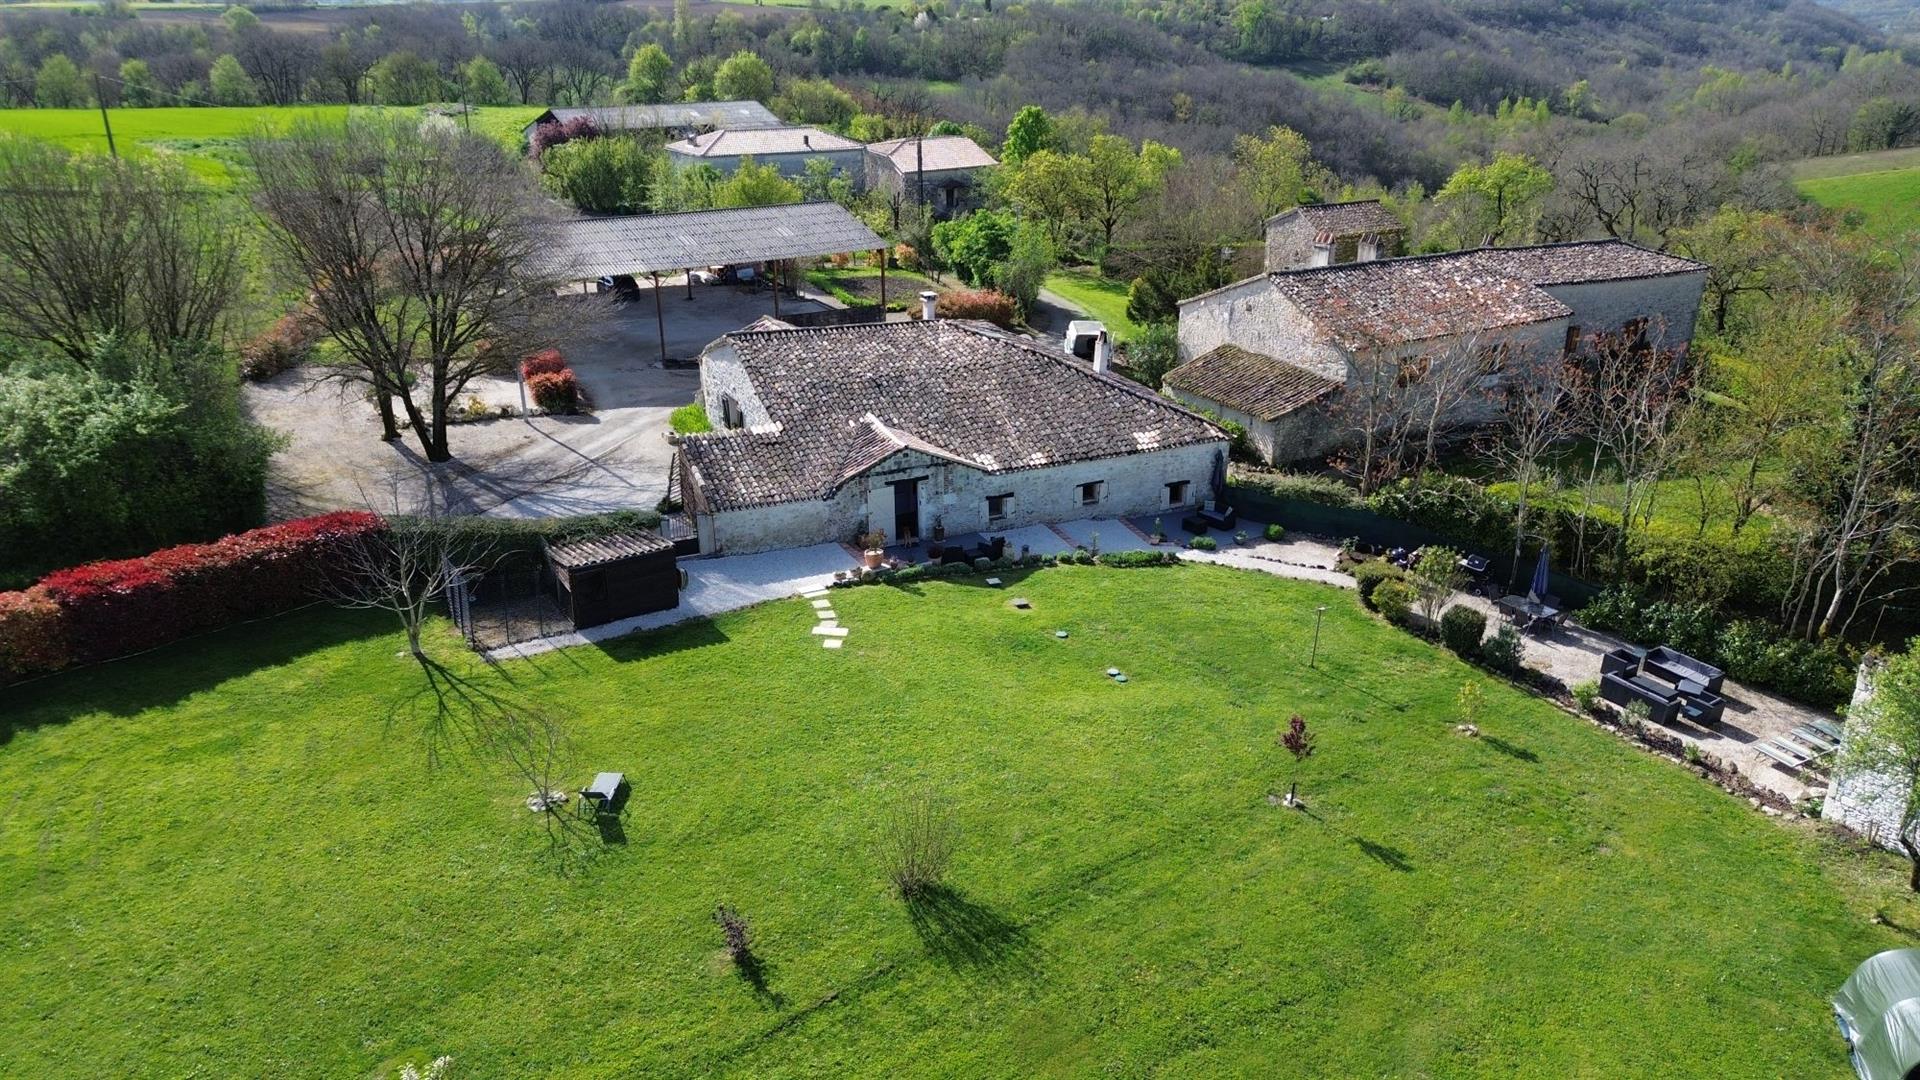 Tarn Et Garonne Stone house in a small hamlet with 3 beds, gardens and metal hangar